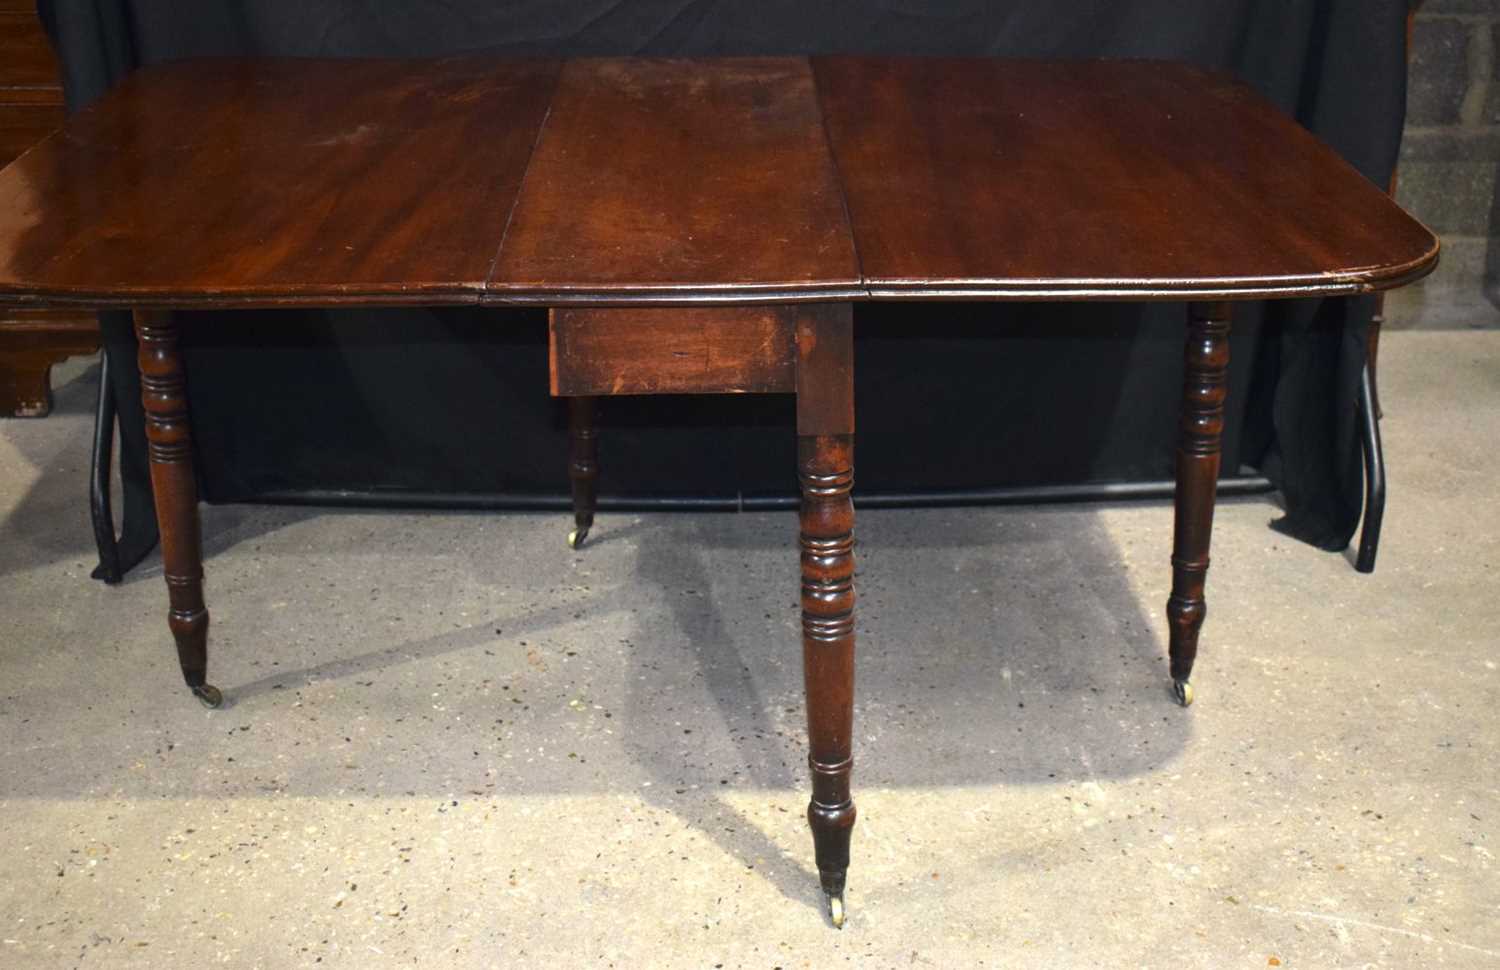 An antique mahogany drop leaf dining table 71 x 145 x 104 cm. - Image 2 of 10